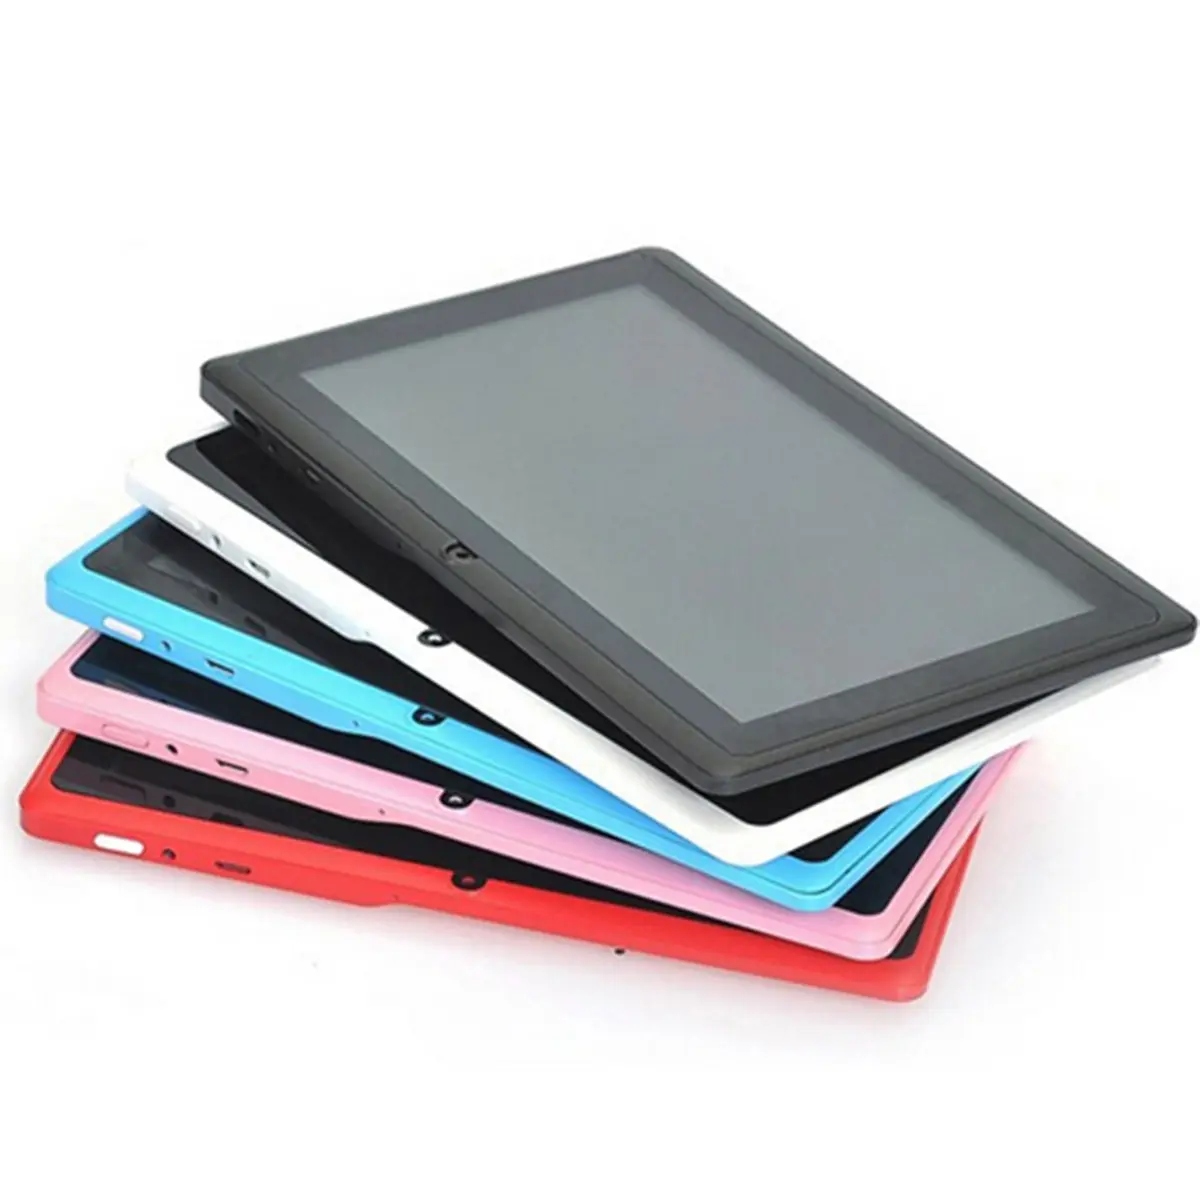 Cheapest 7inch WiFi Tablet PC Q88 1GB+8GB very hot selling!!! buy now.